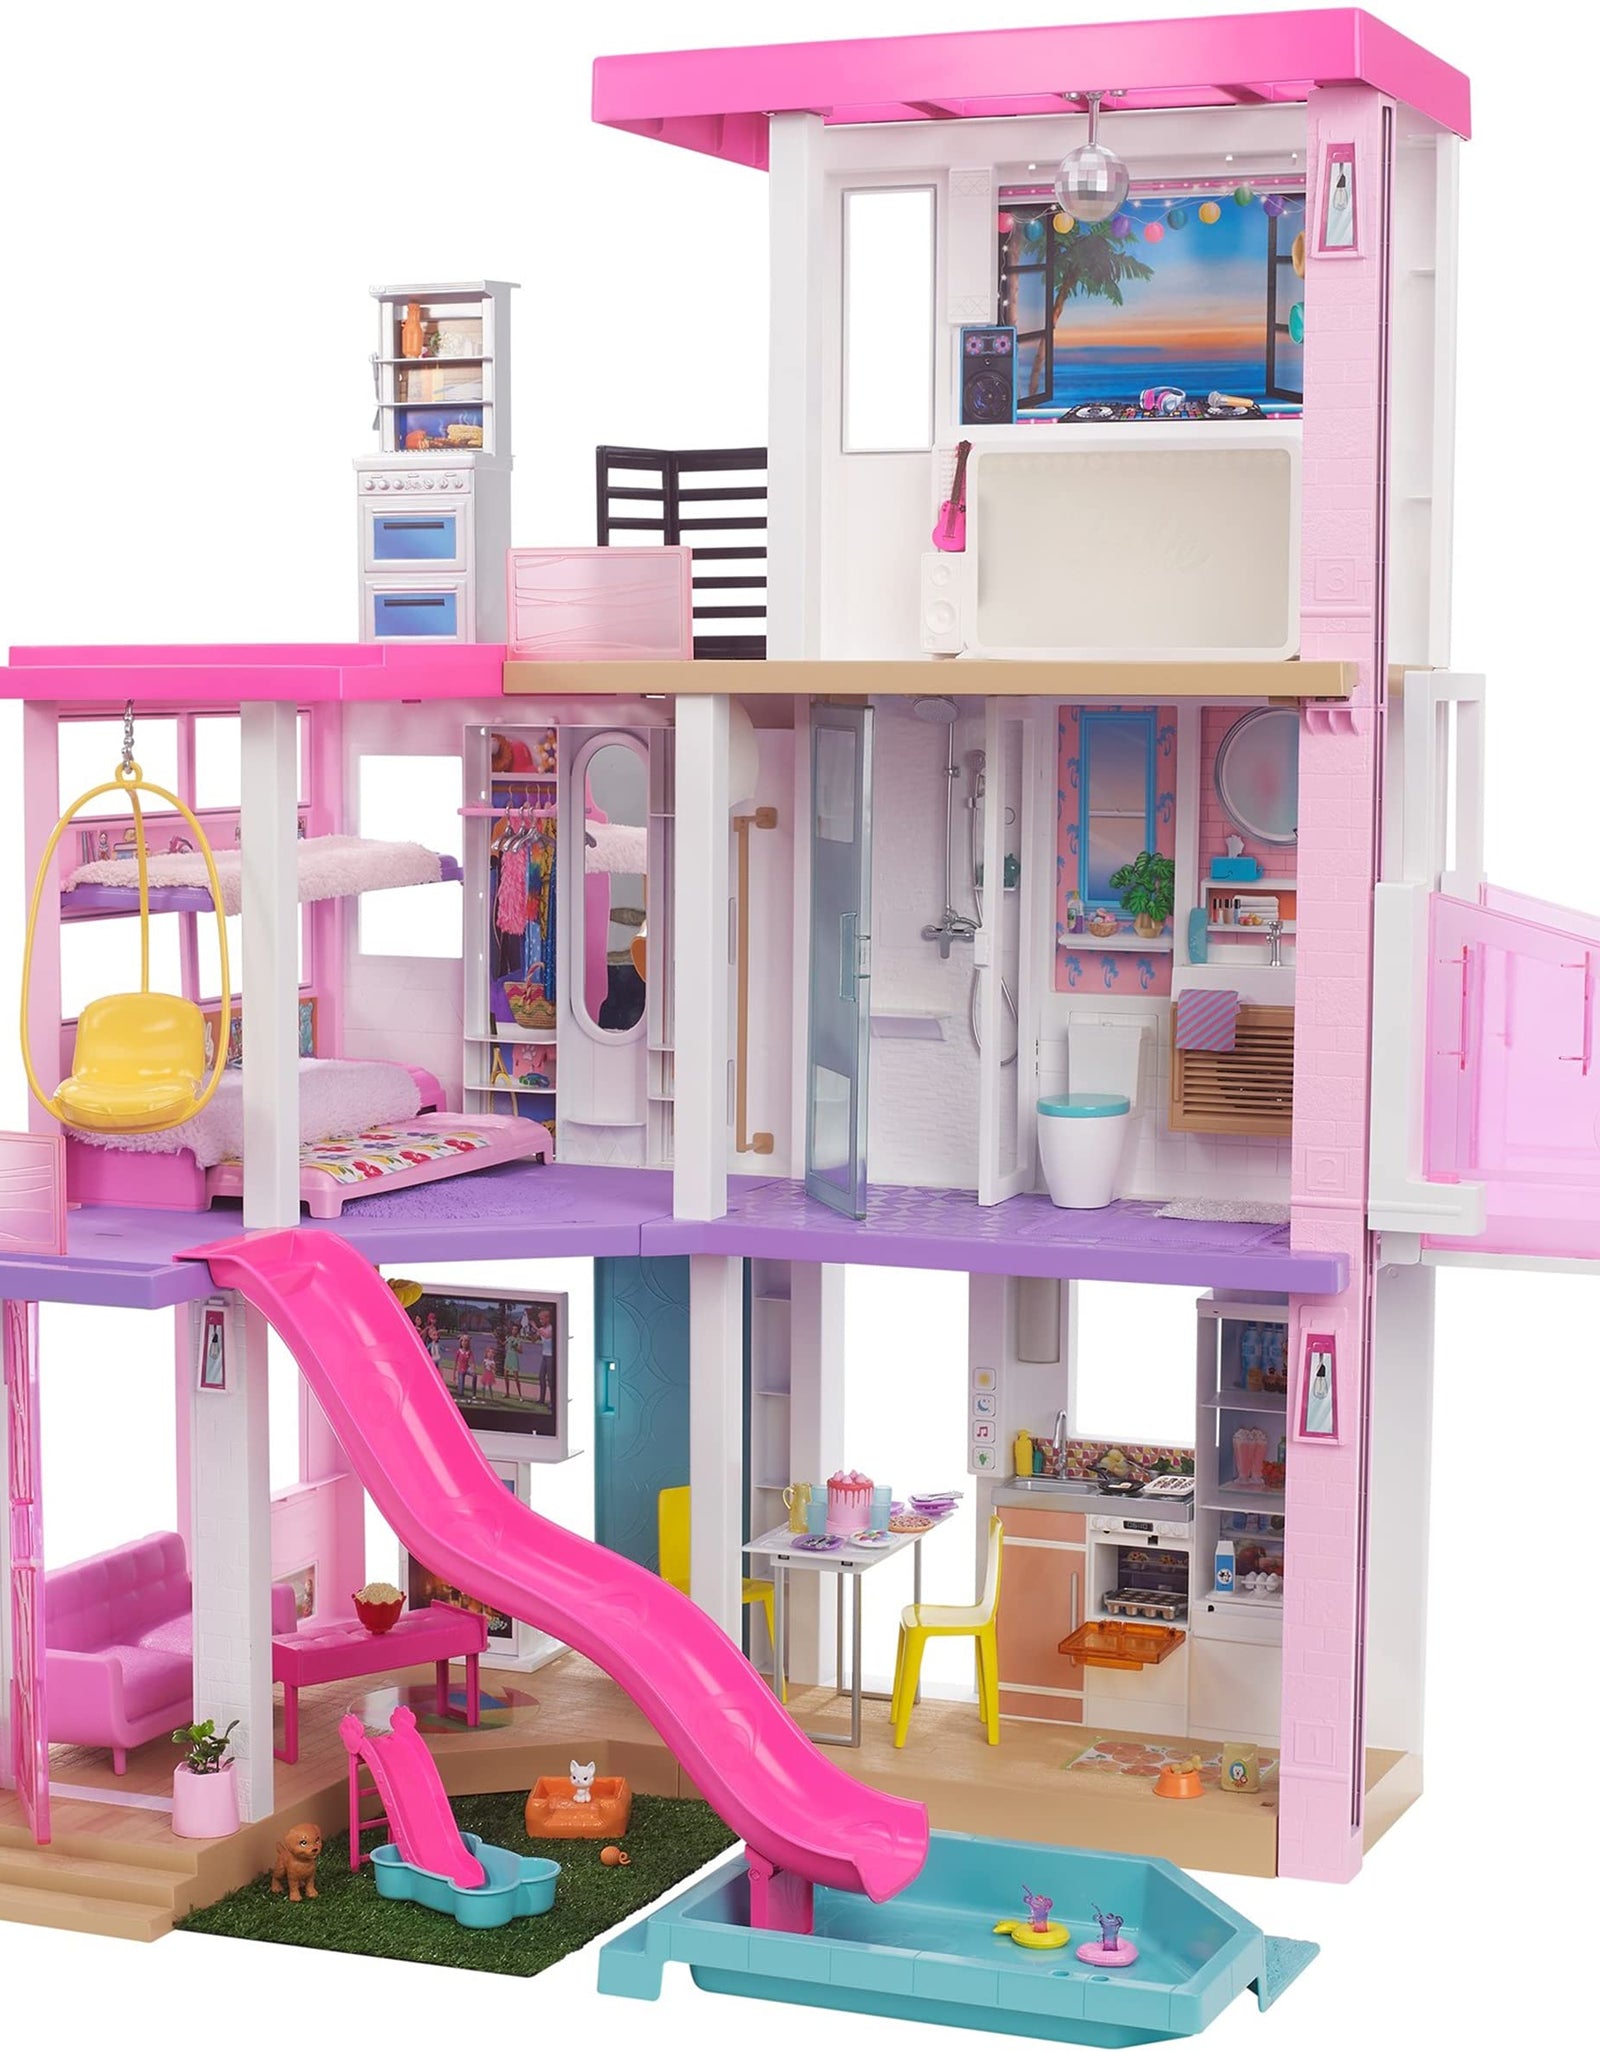 Barbie Dreamhouse (3.75-ft) 3-Story Dollhouse Playset with Pool & Slide, Party Room, Elevator, Puppy Play Area, Customizable Lights & Sounds, 75+ Pieces, Gift for 3 to 7 Year Olds, New for 2021